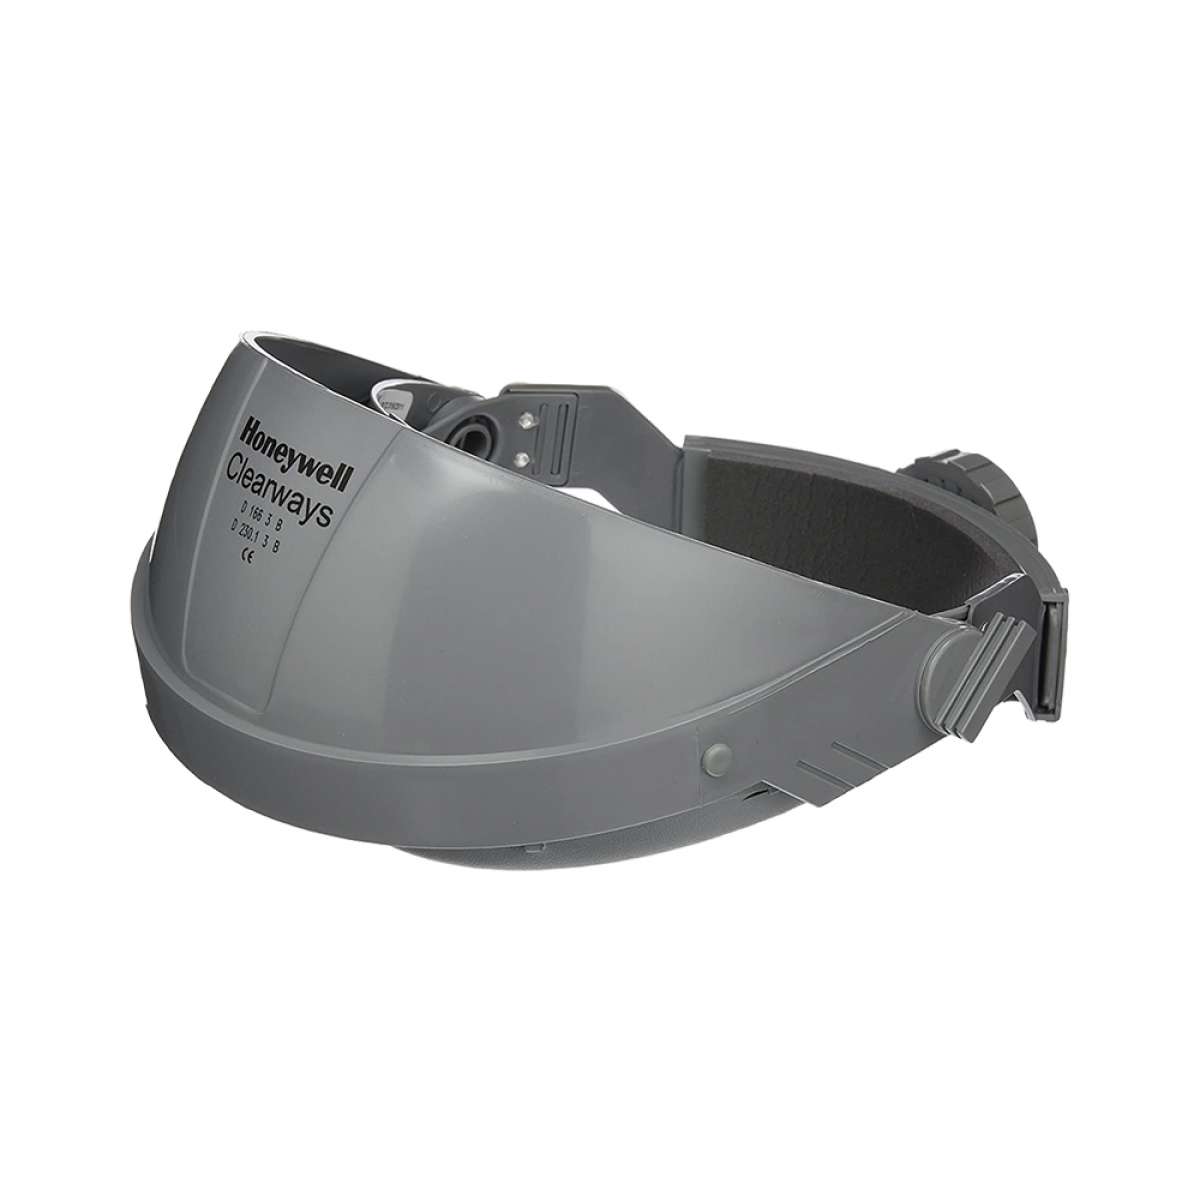 Honeywell Clearways brow guard - face & head protection